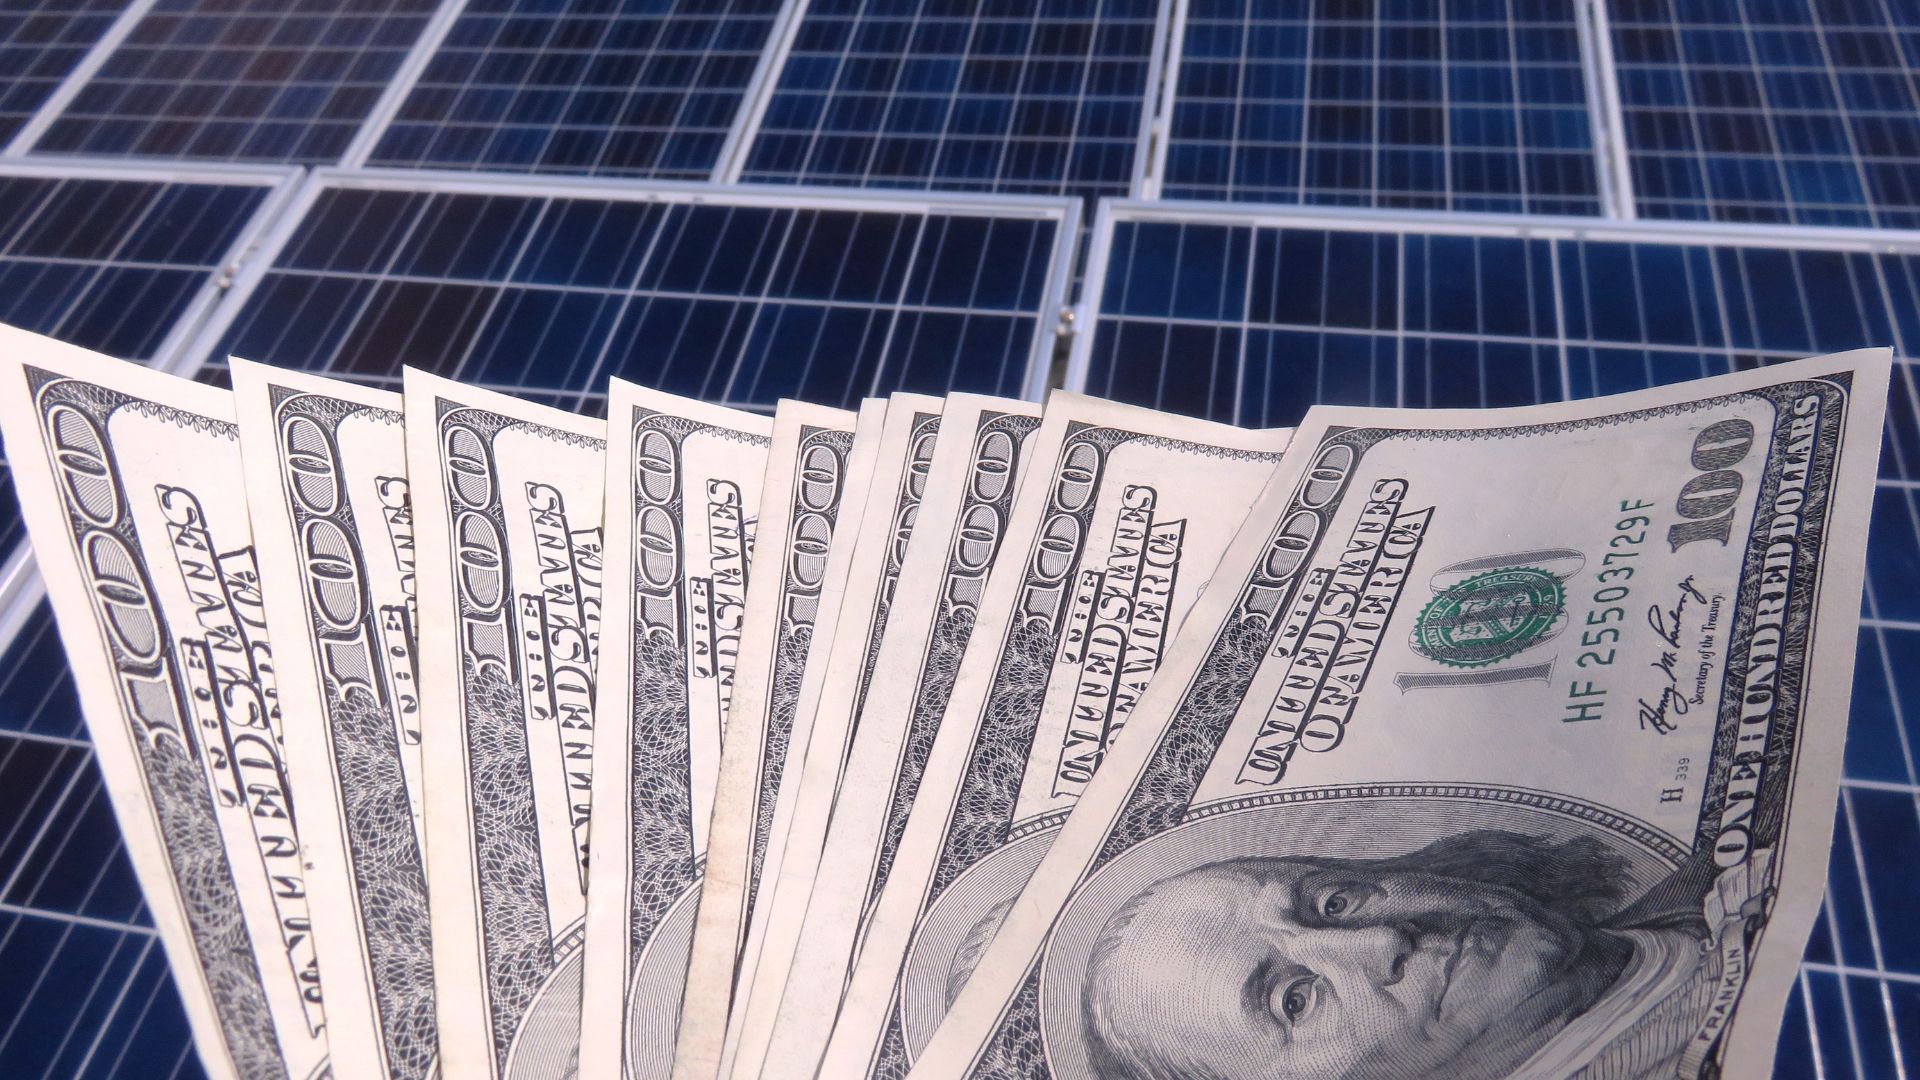 What Solar Incentives Are Available For Homeowners?